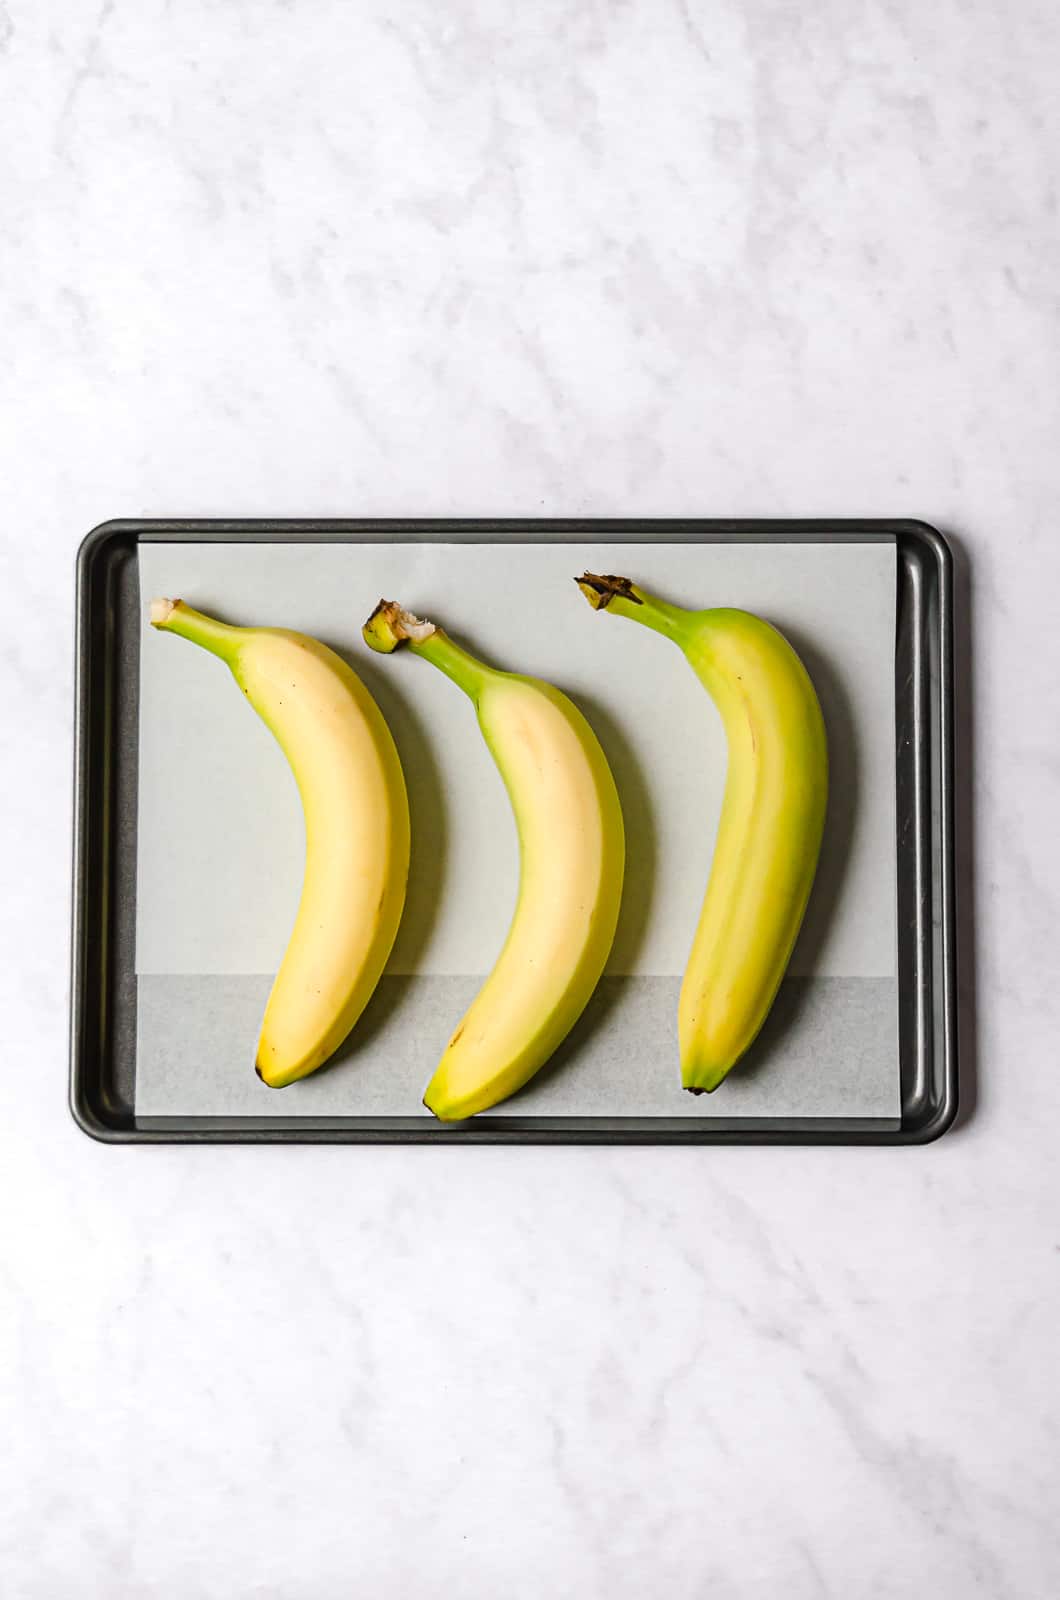 three yellow bananas on parchment lined baking sheet.